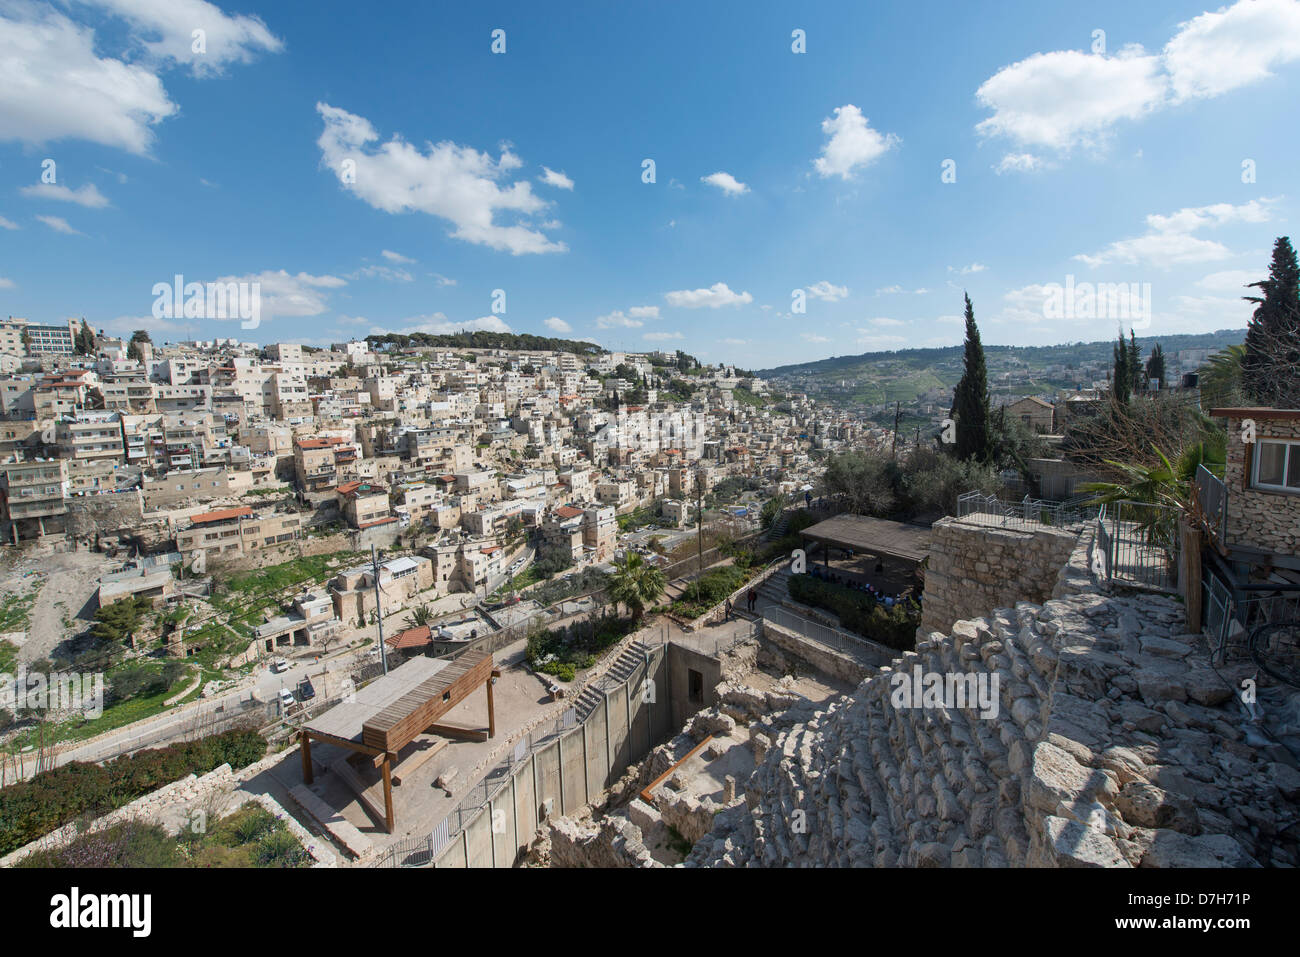 View over the Kidron Valley, Jerusalem, from the old city of David, the ruins of which are in the foreground. Stock Photo